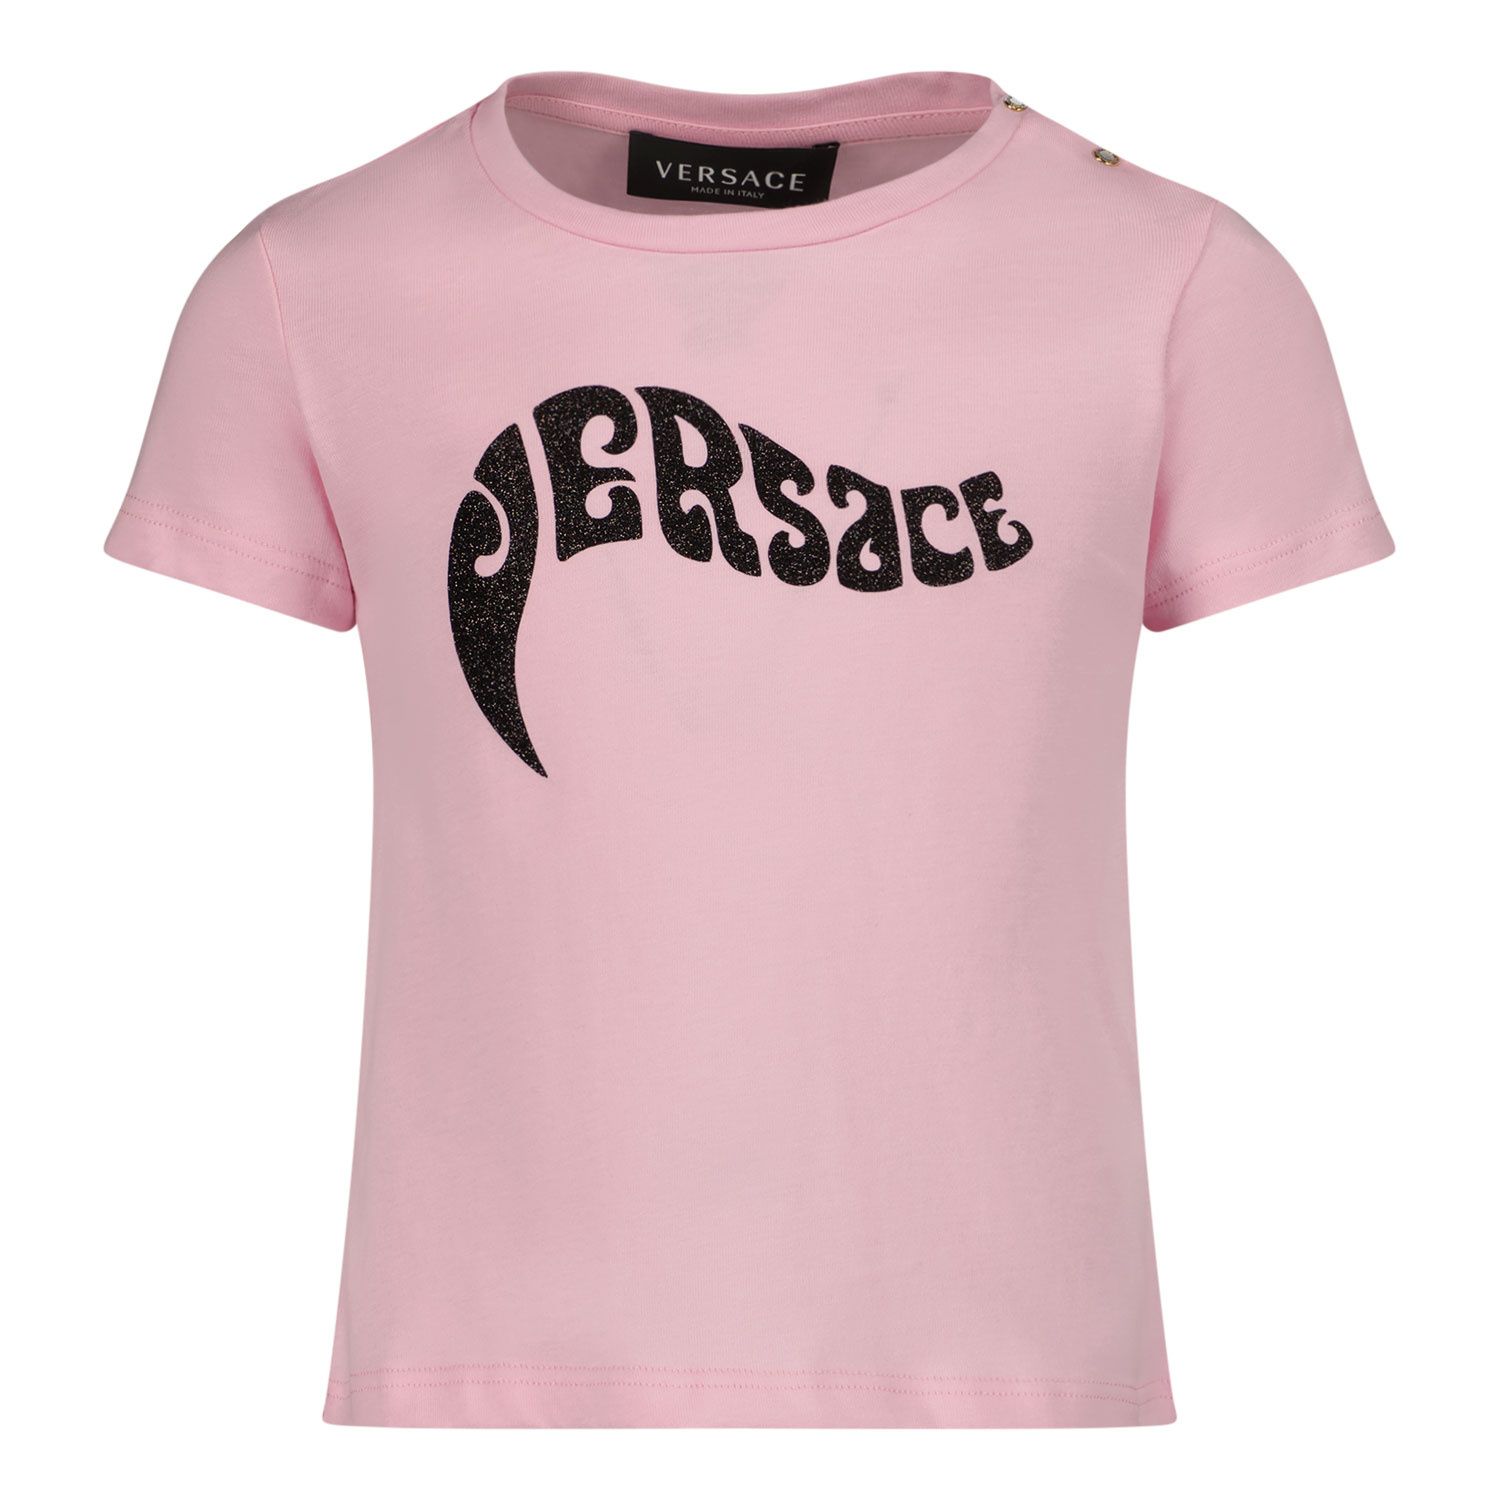 Picture of Versace 1000152 1A02613 baby shirt light pink